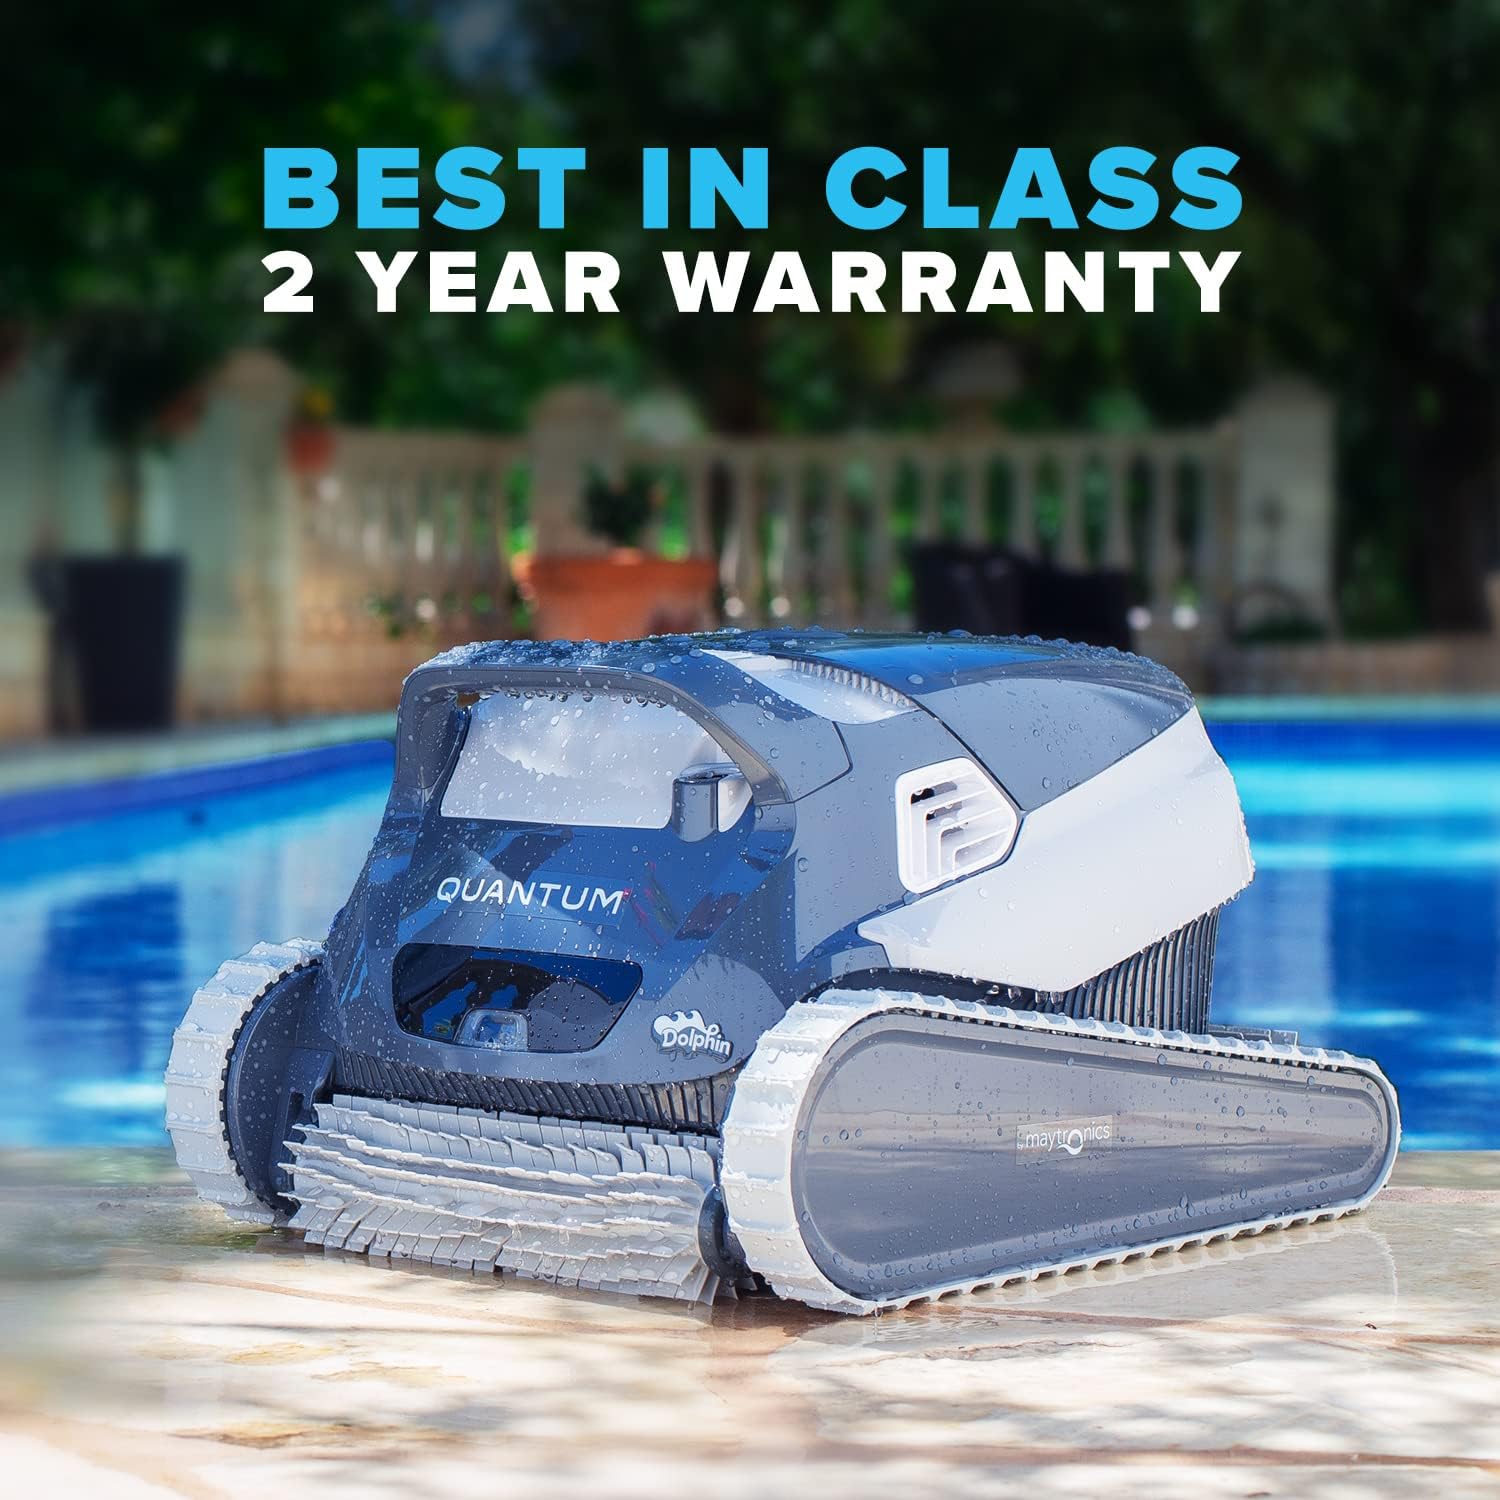 Dolphin Quantum Robotic Pool Cleaner Review